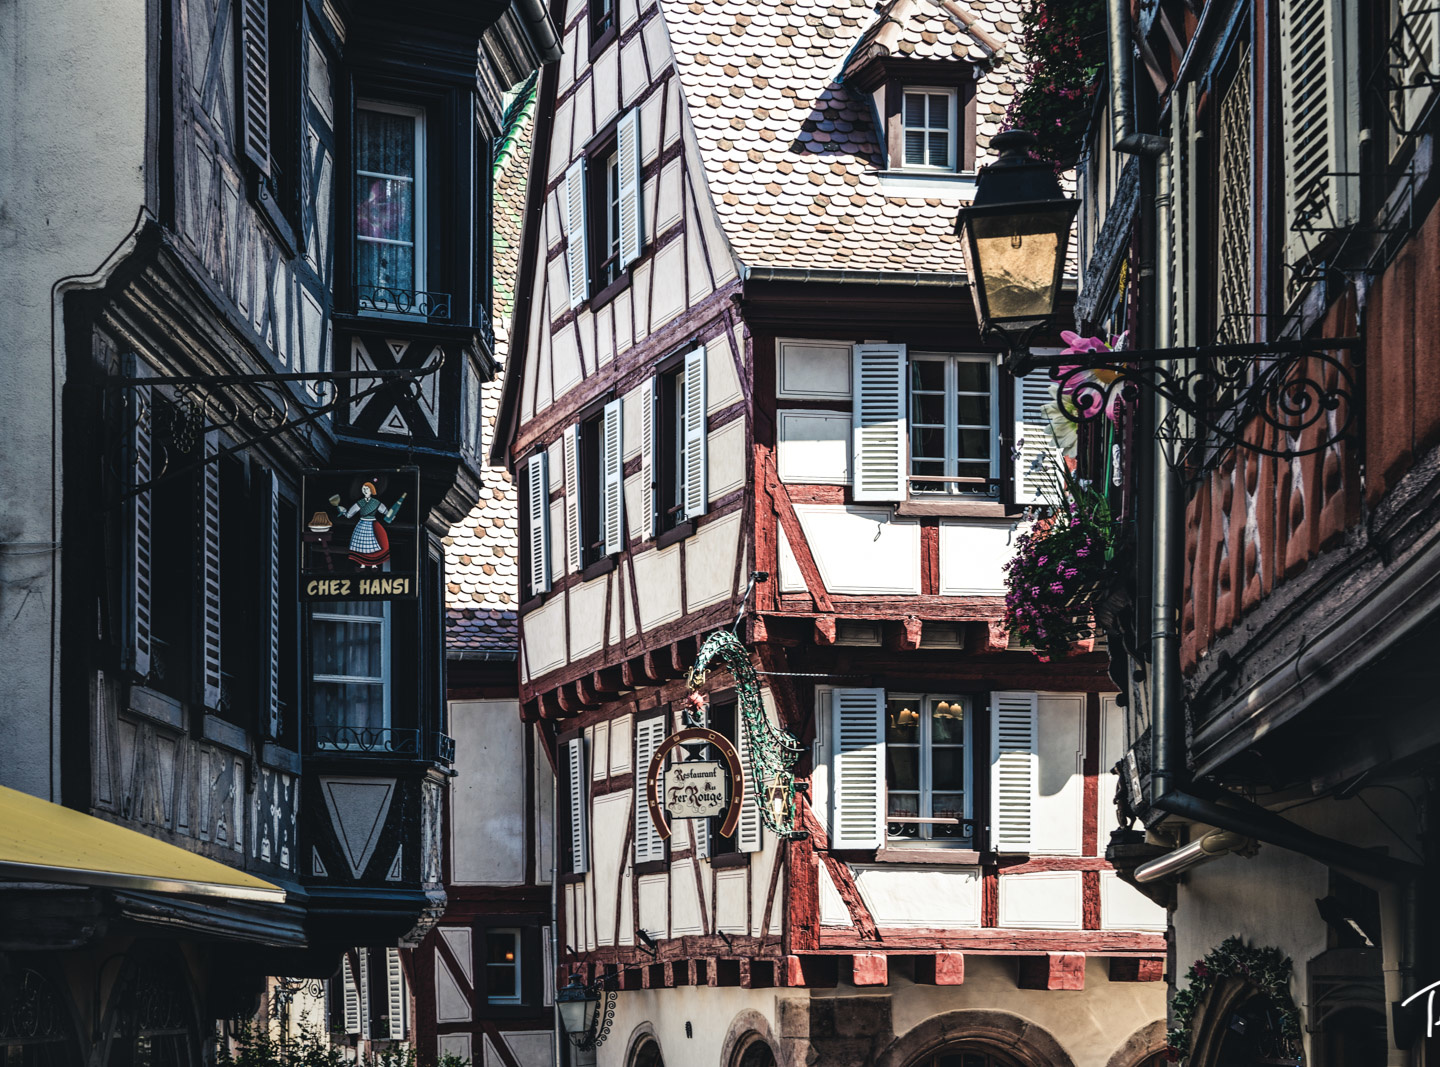 Strolling through Charming Colmar: France’s Most Beautiful Town?